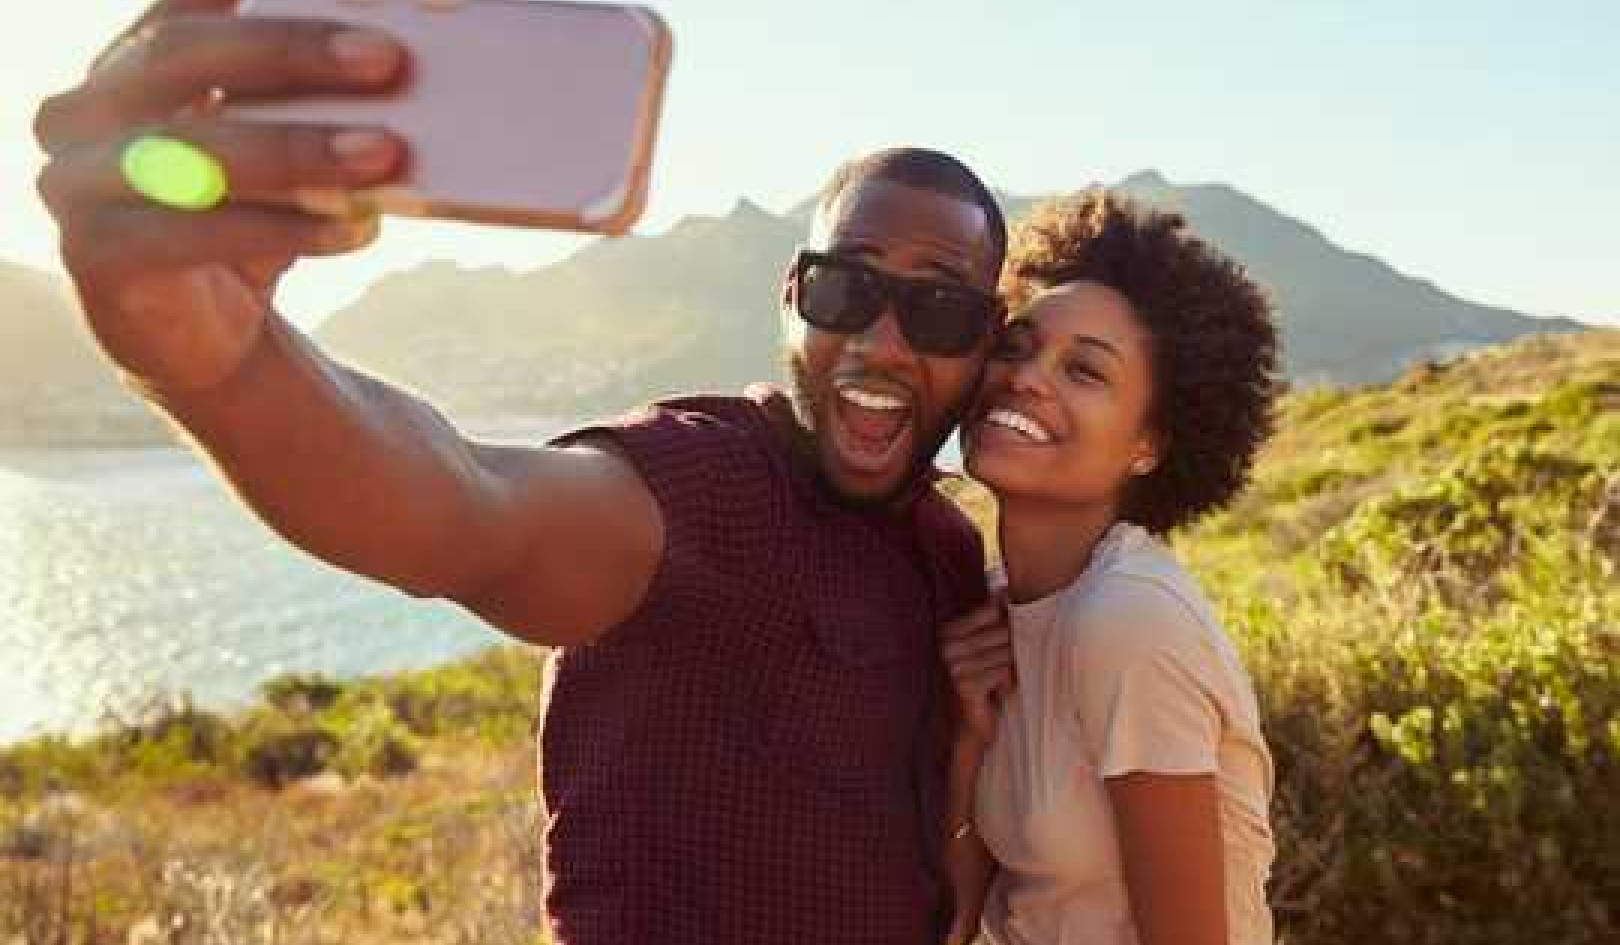 Why People Post Couple Photos As Their Social Media Profile Pictures